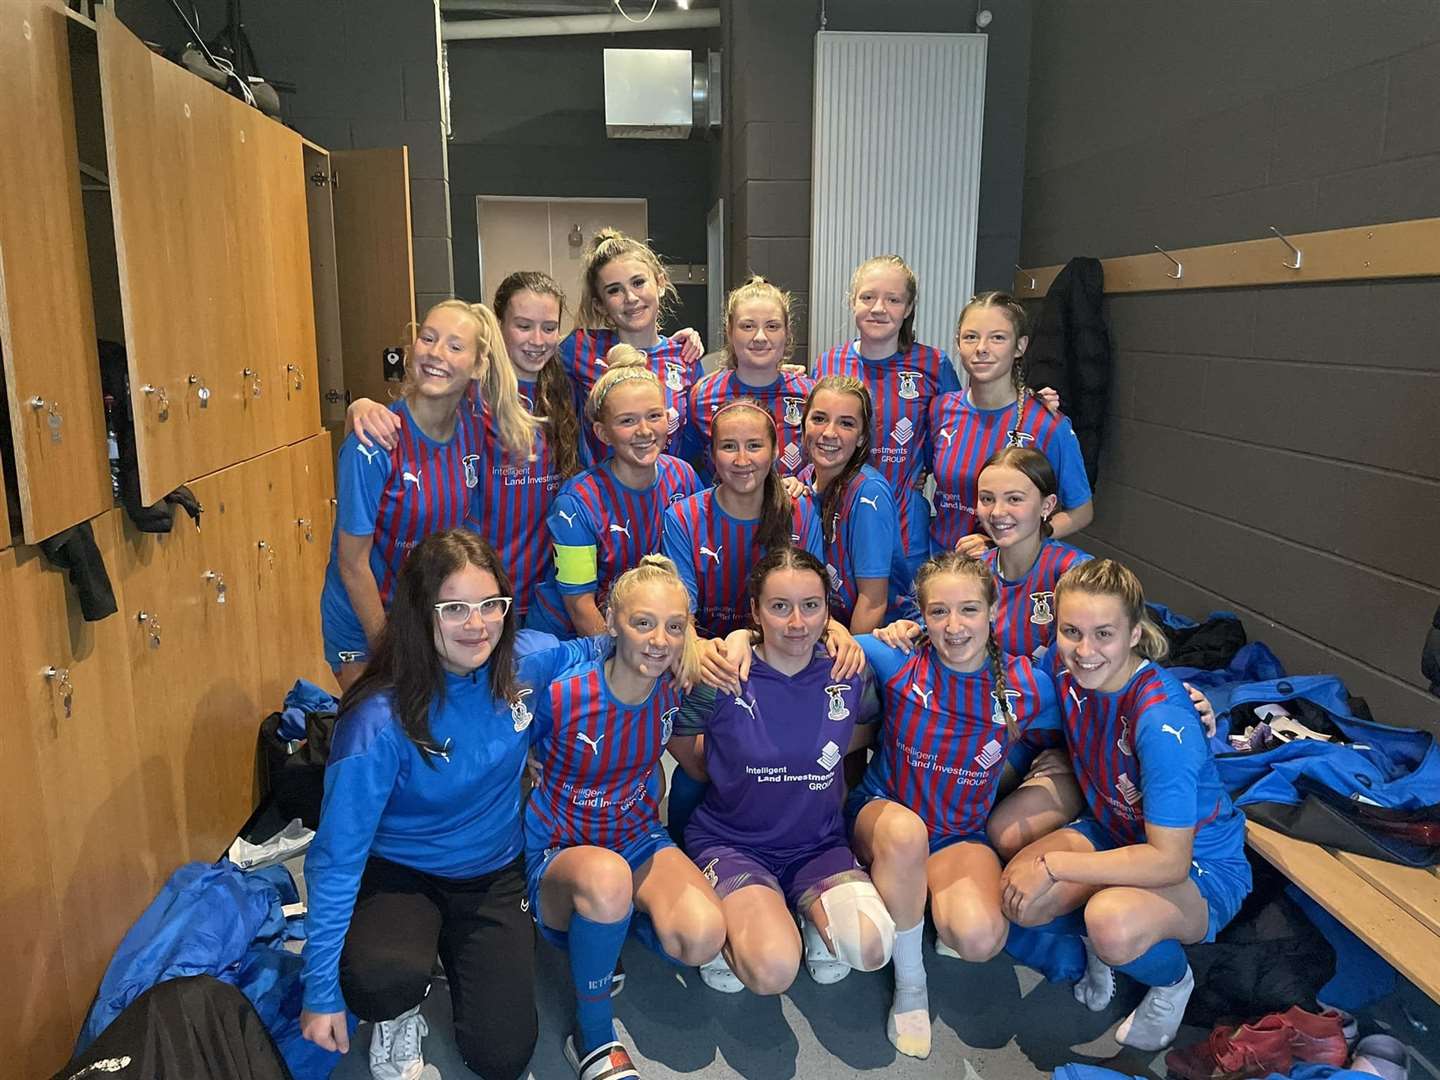 Inverness Caledonian Thistle Women's under-18s were crowned league champions with a 2-1 win over Grampian.